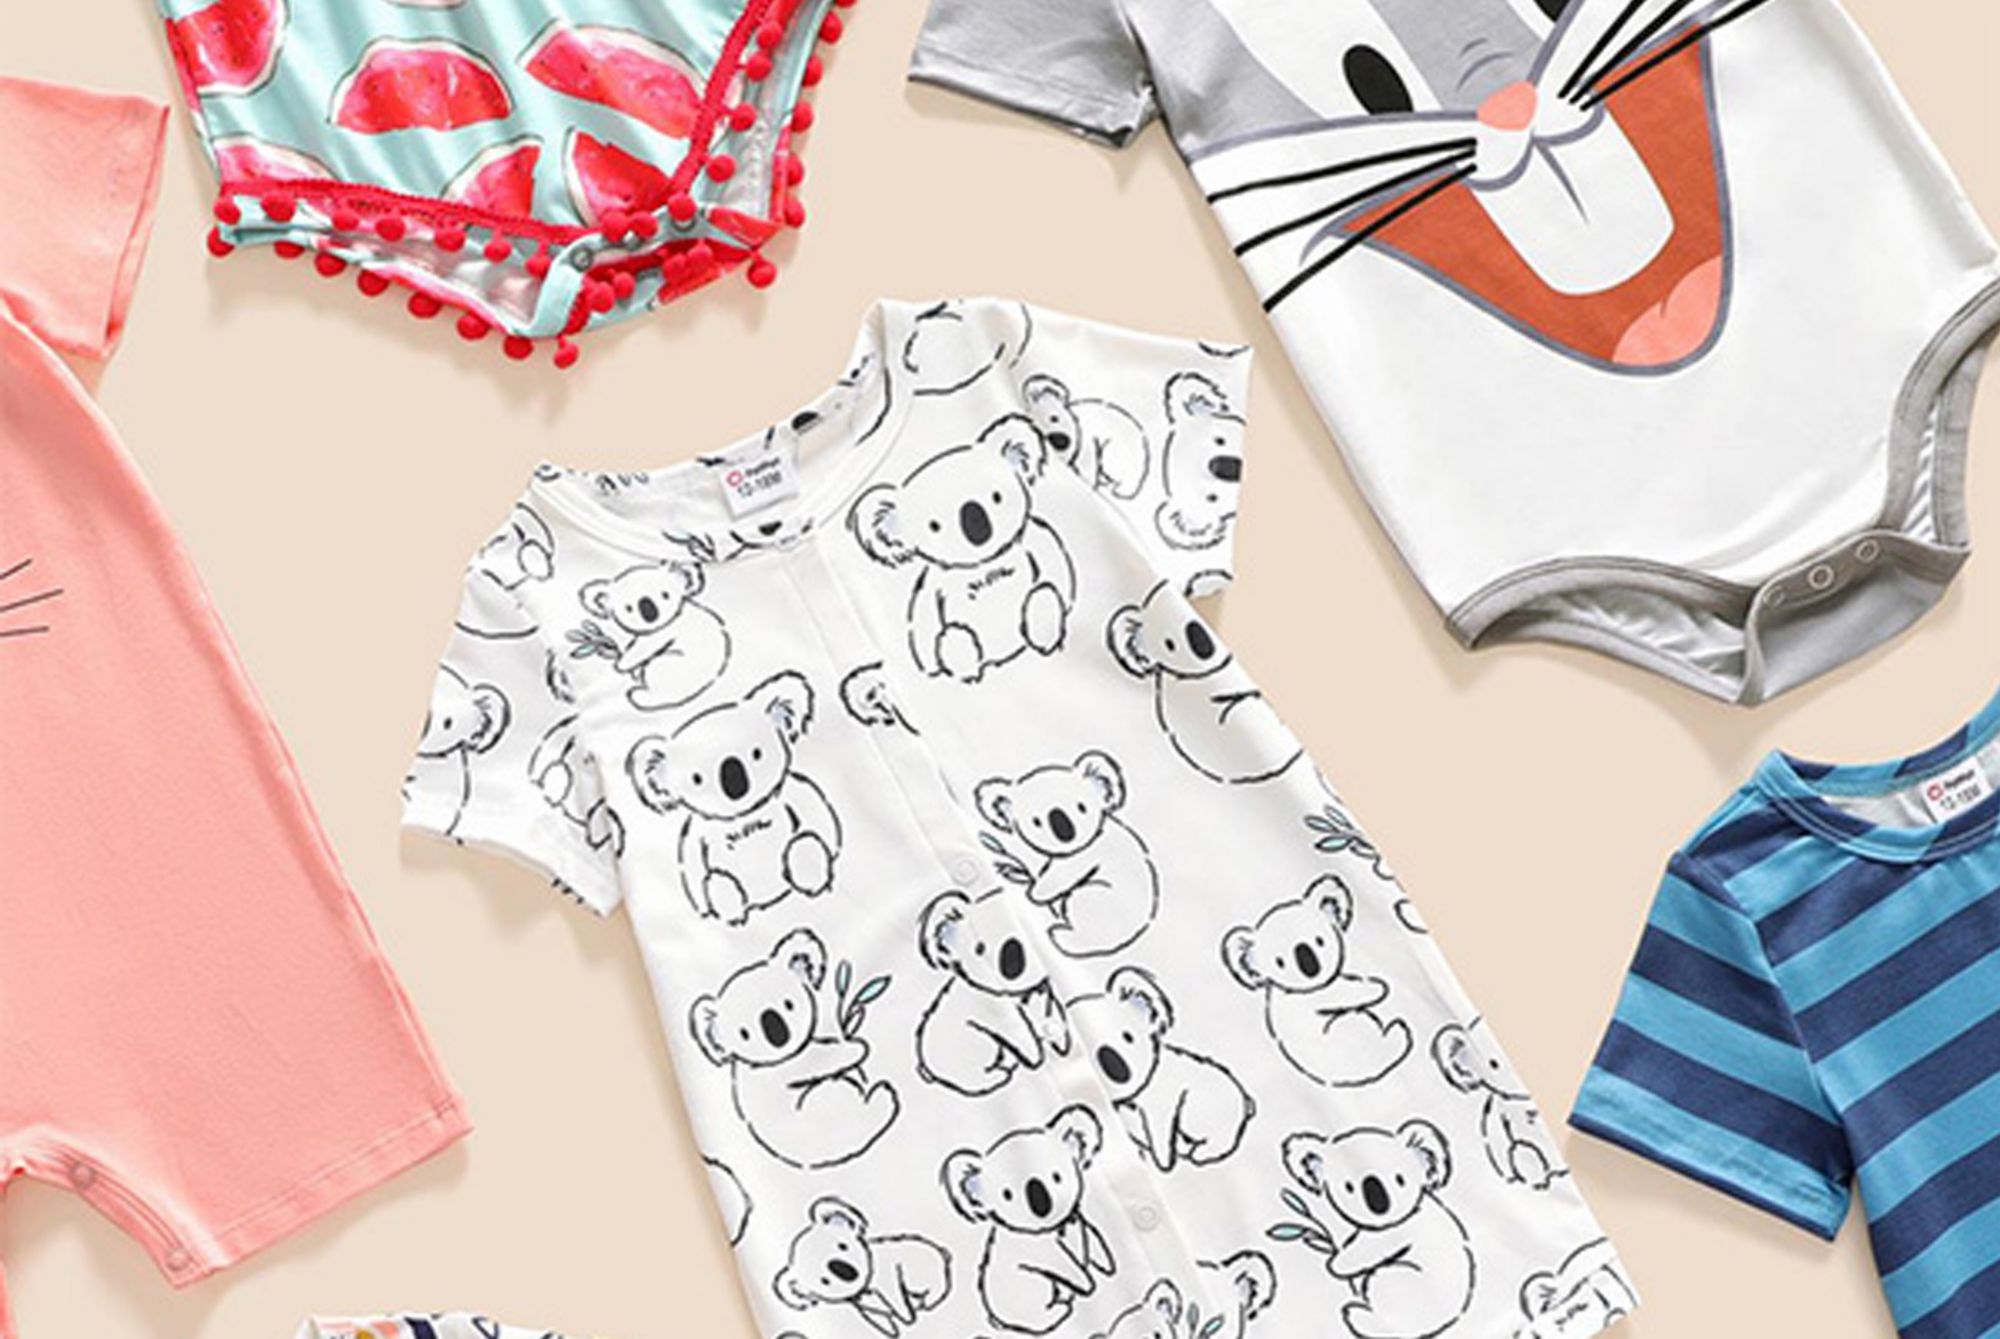 PatPat baby rompers now made with Naia 